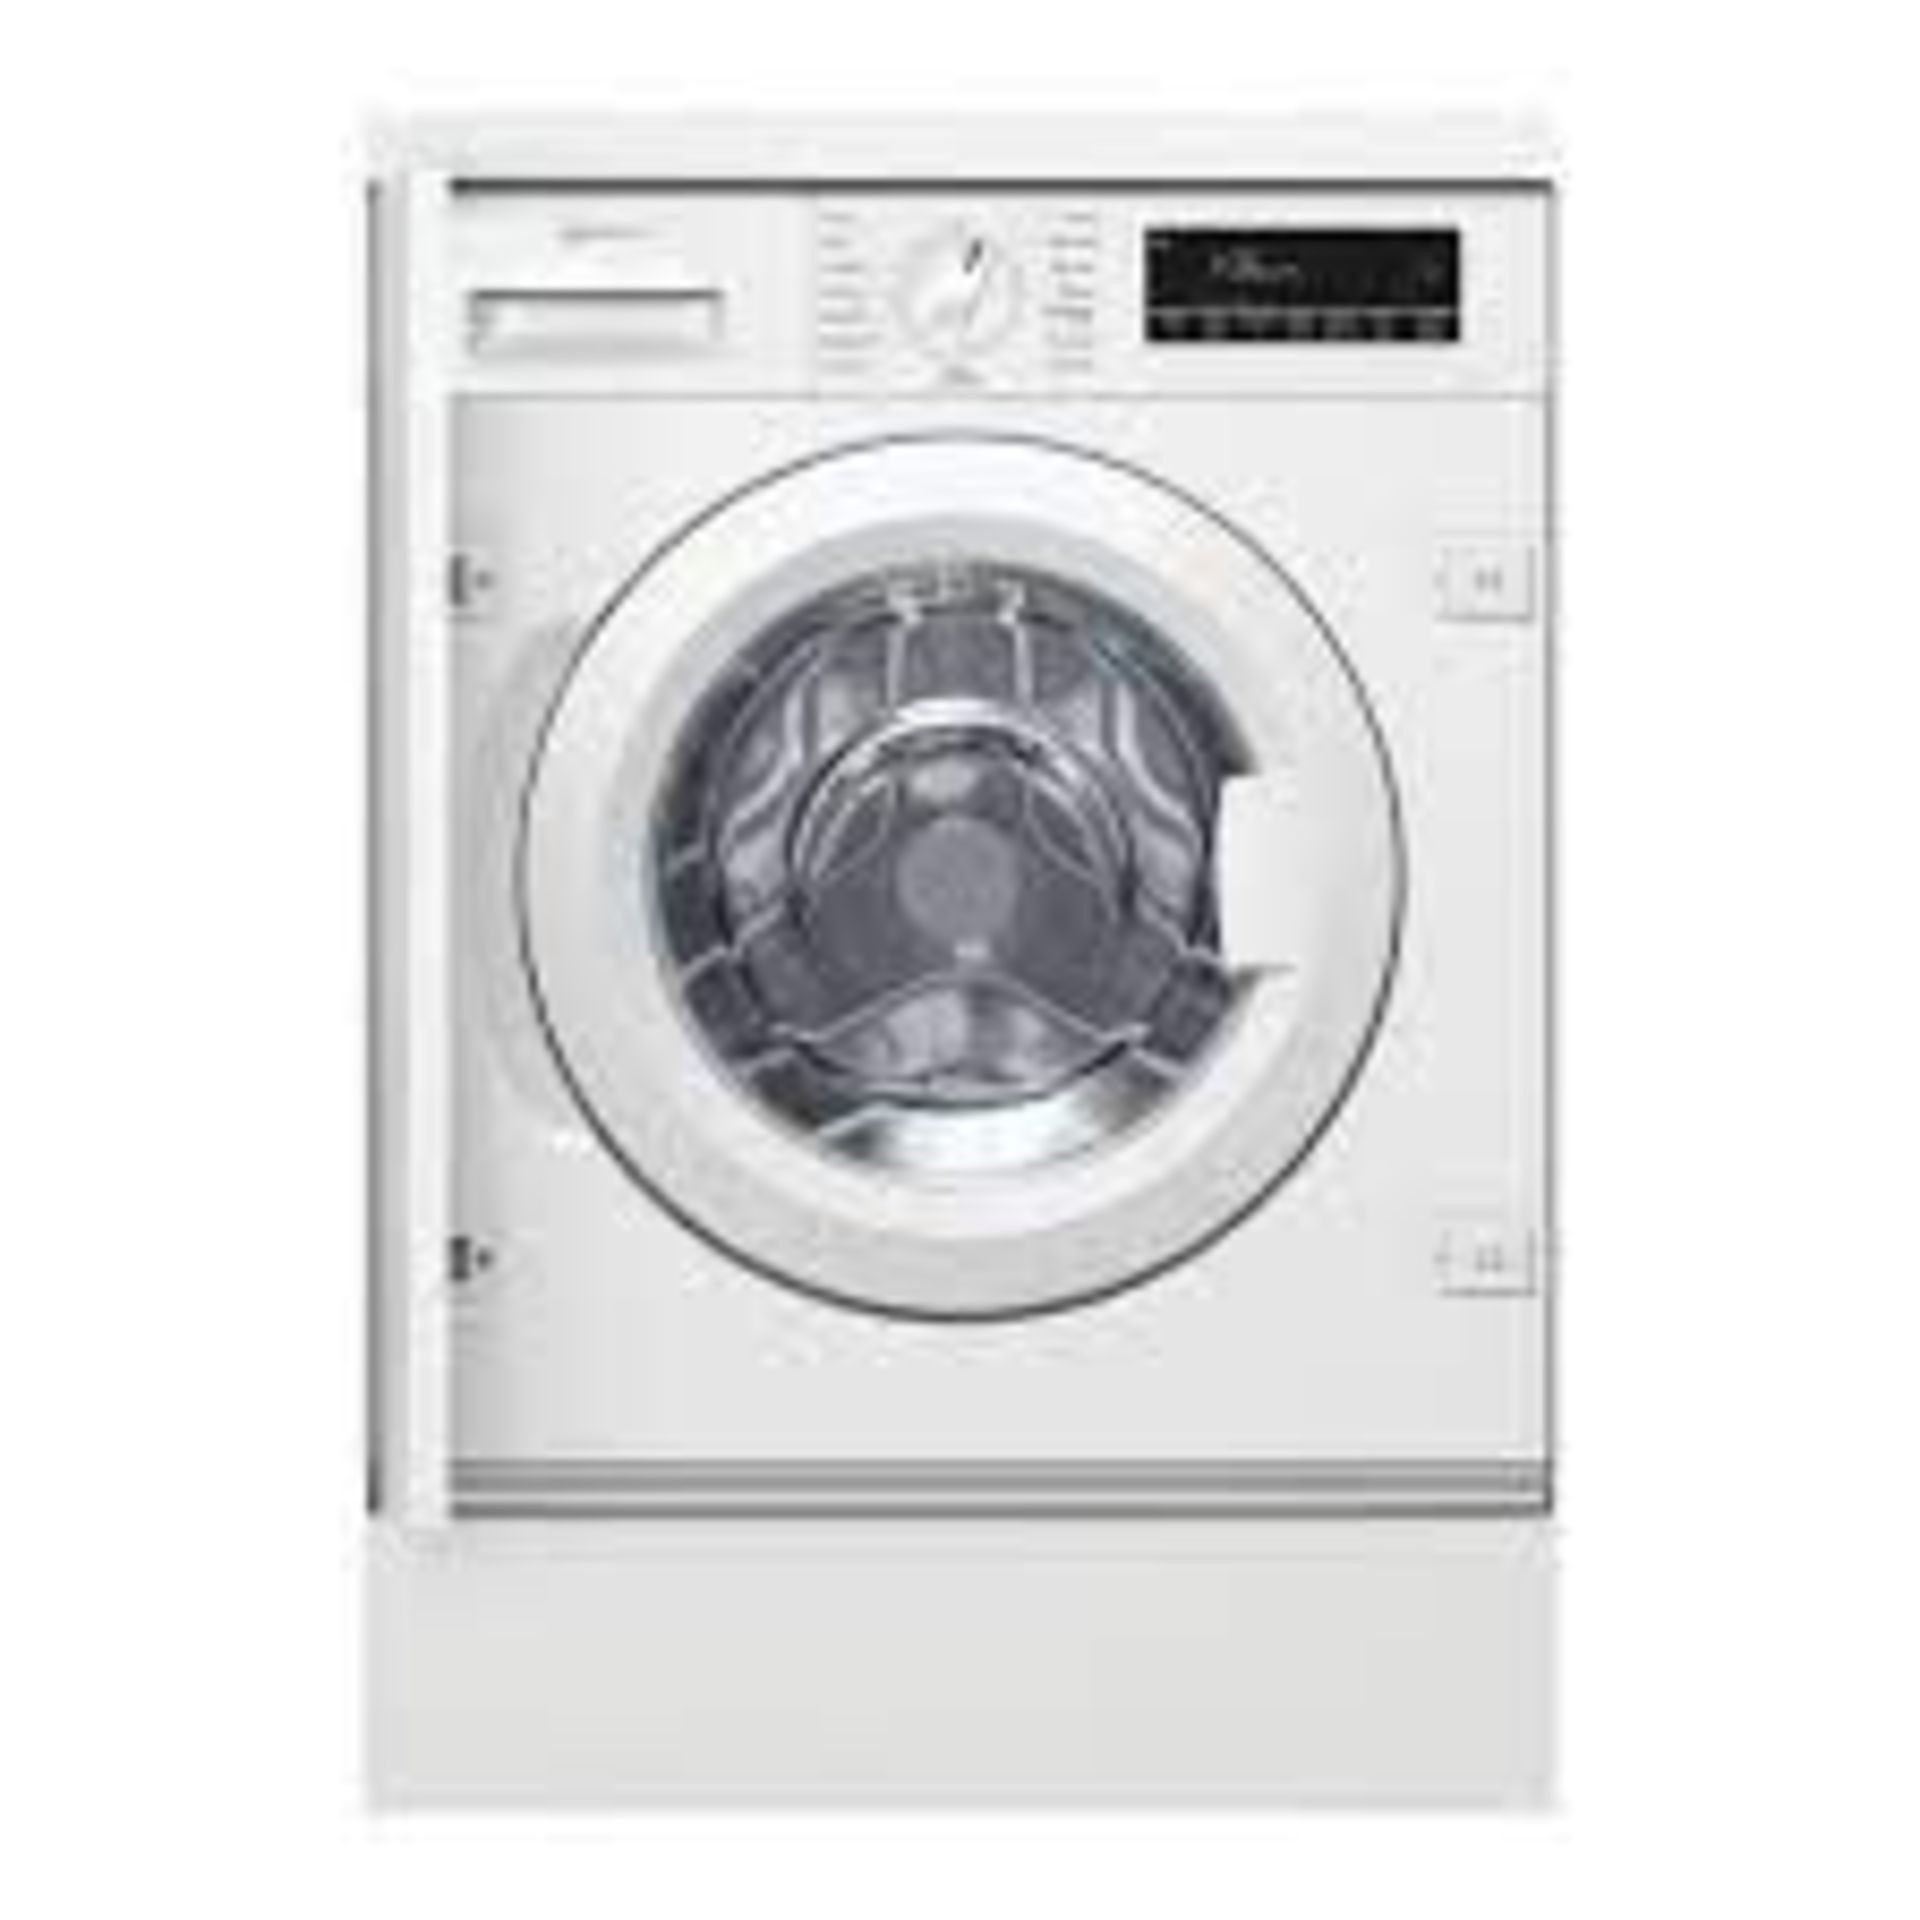 Neff W544BX1GB 8kg 1400 Spin Integrated Washing. - H/S. RRP £999.00. The extremely quiet and durable